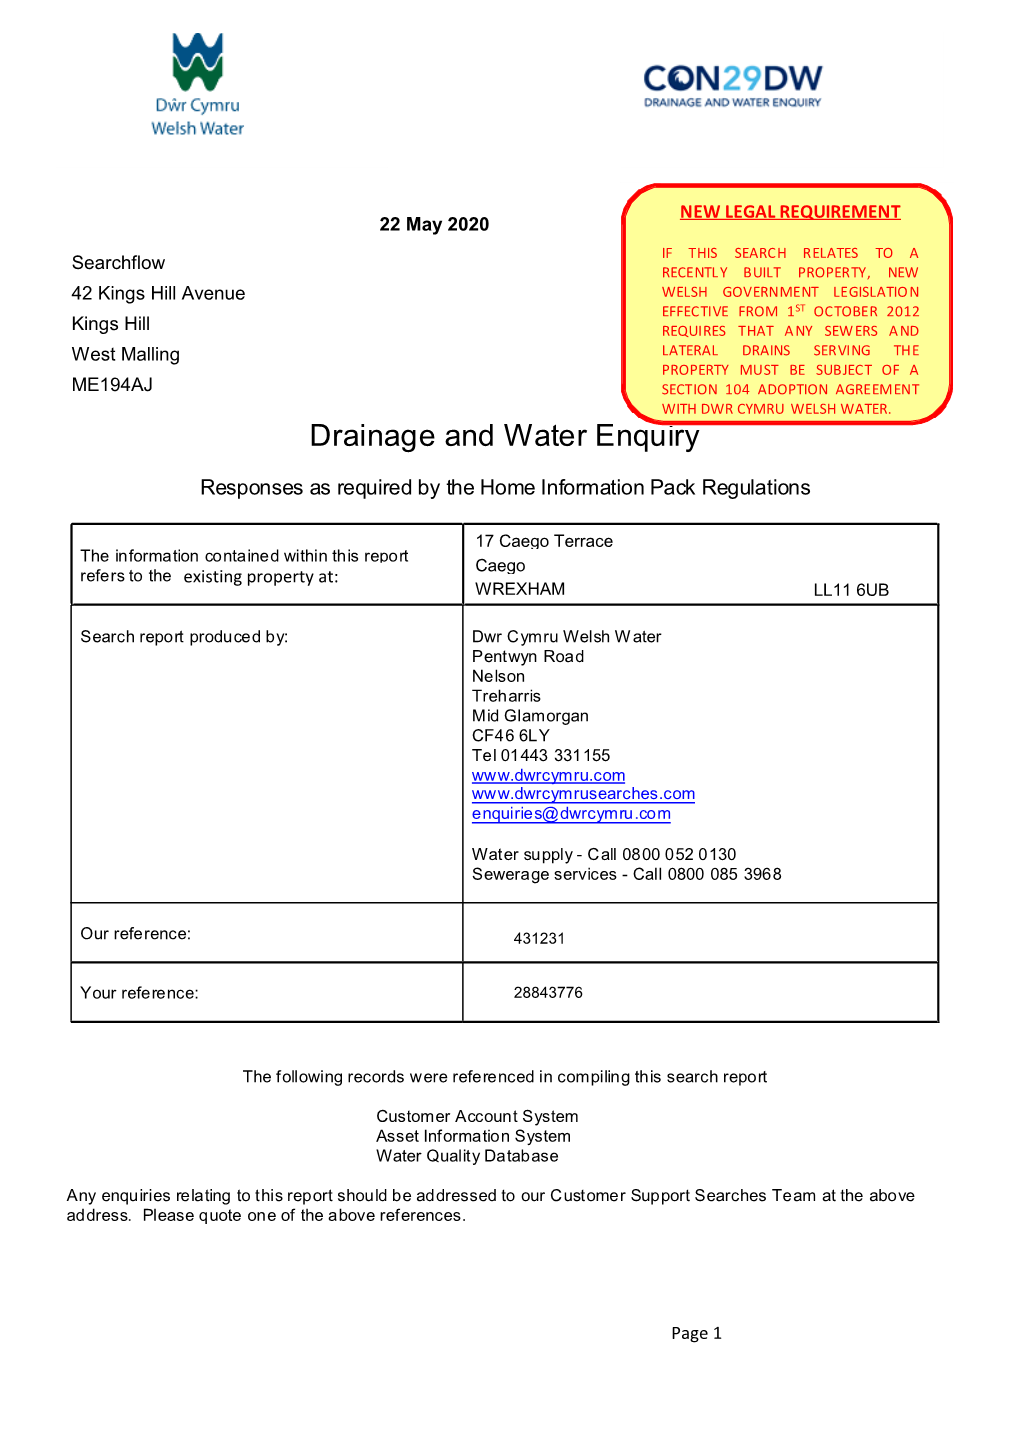 Drainage and Water Enquiry